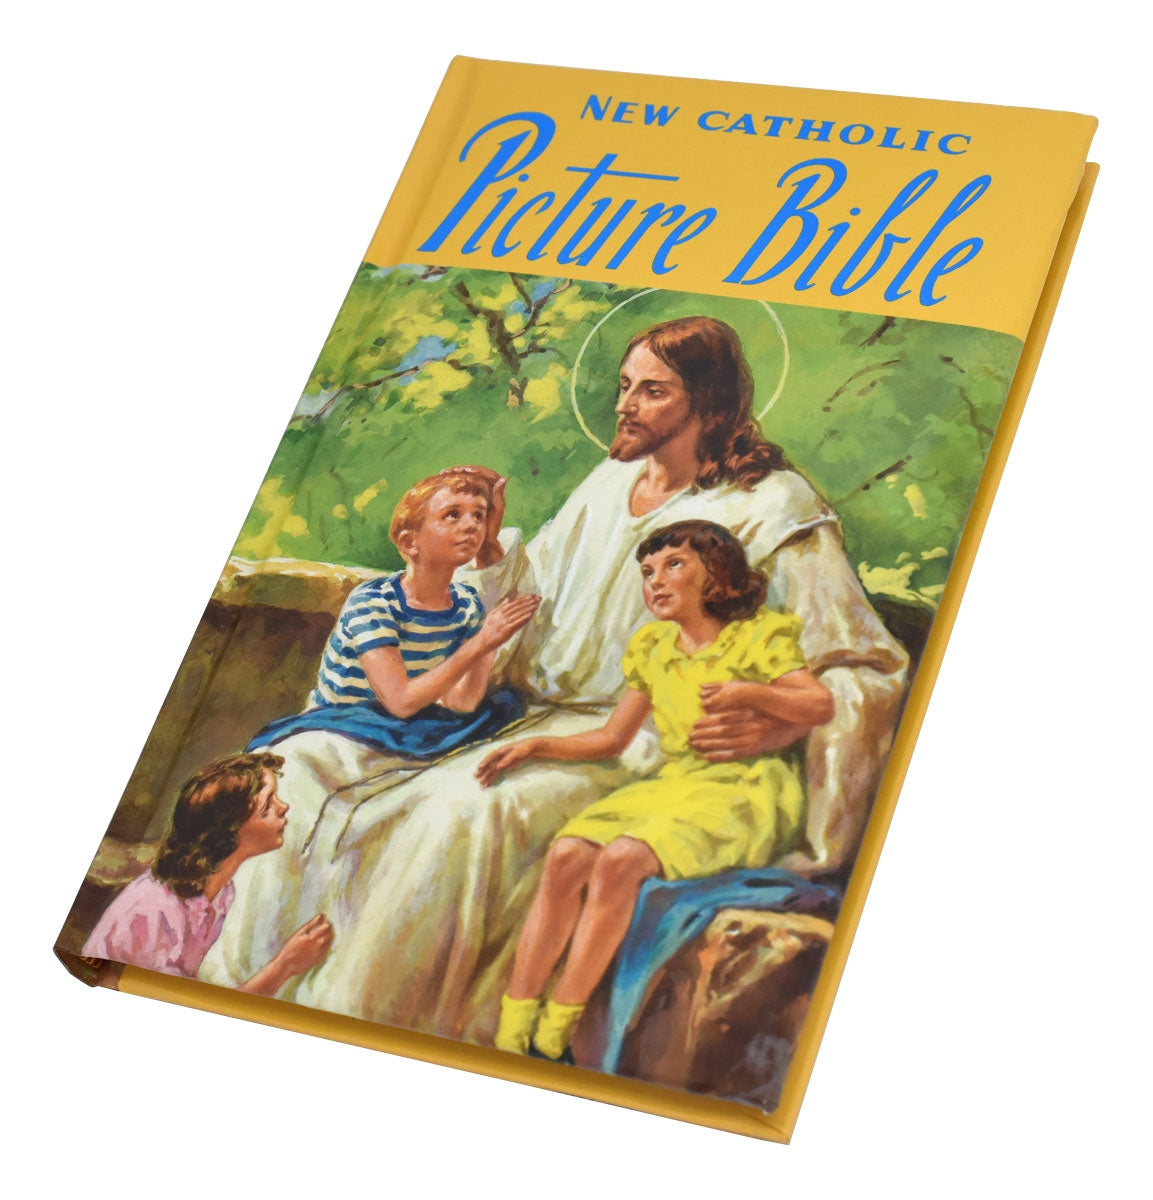 New Catholic Picture Book